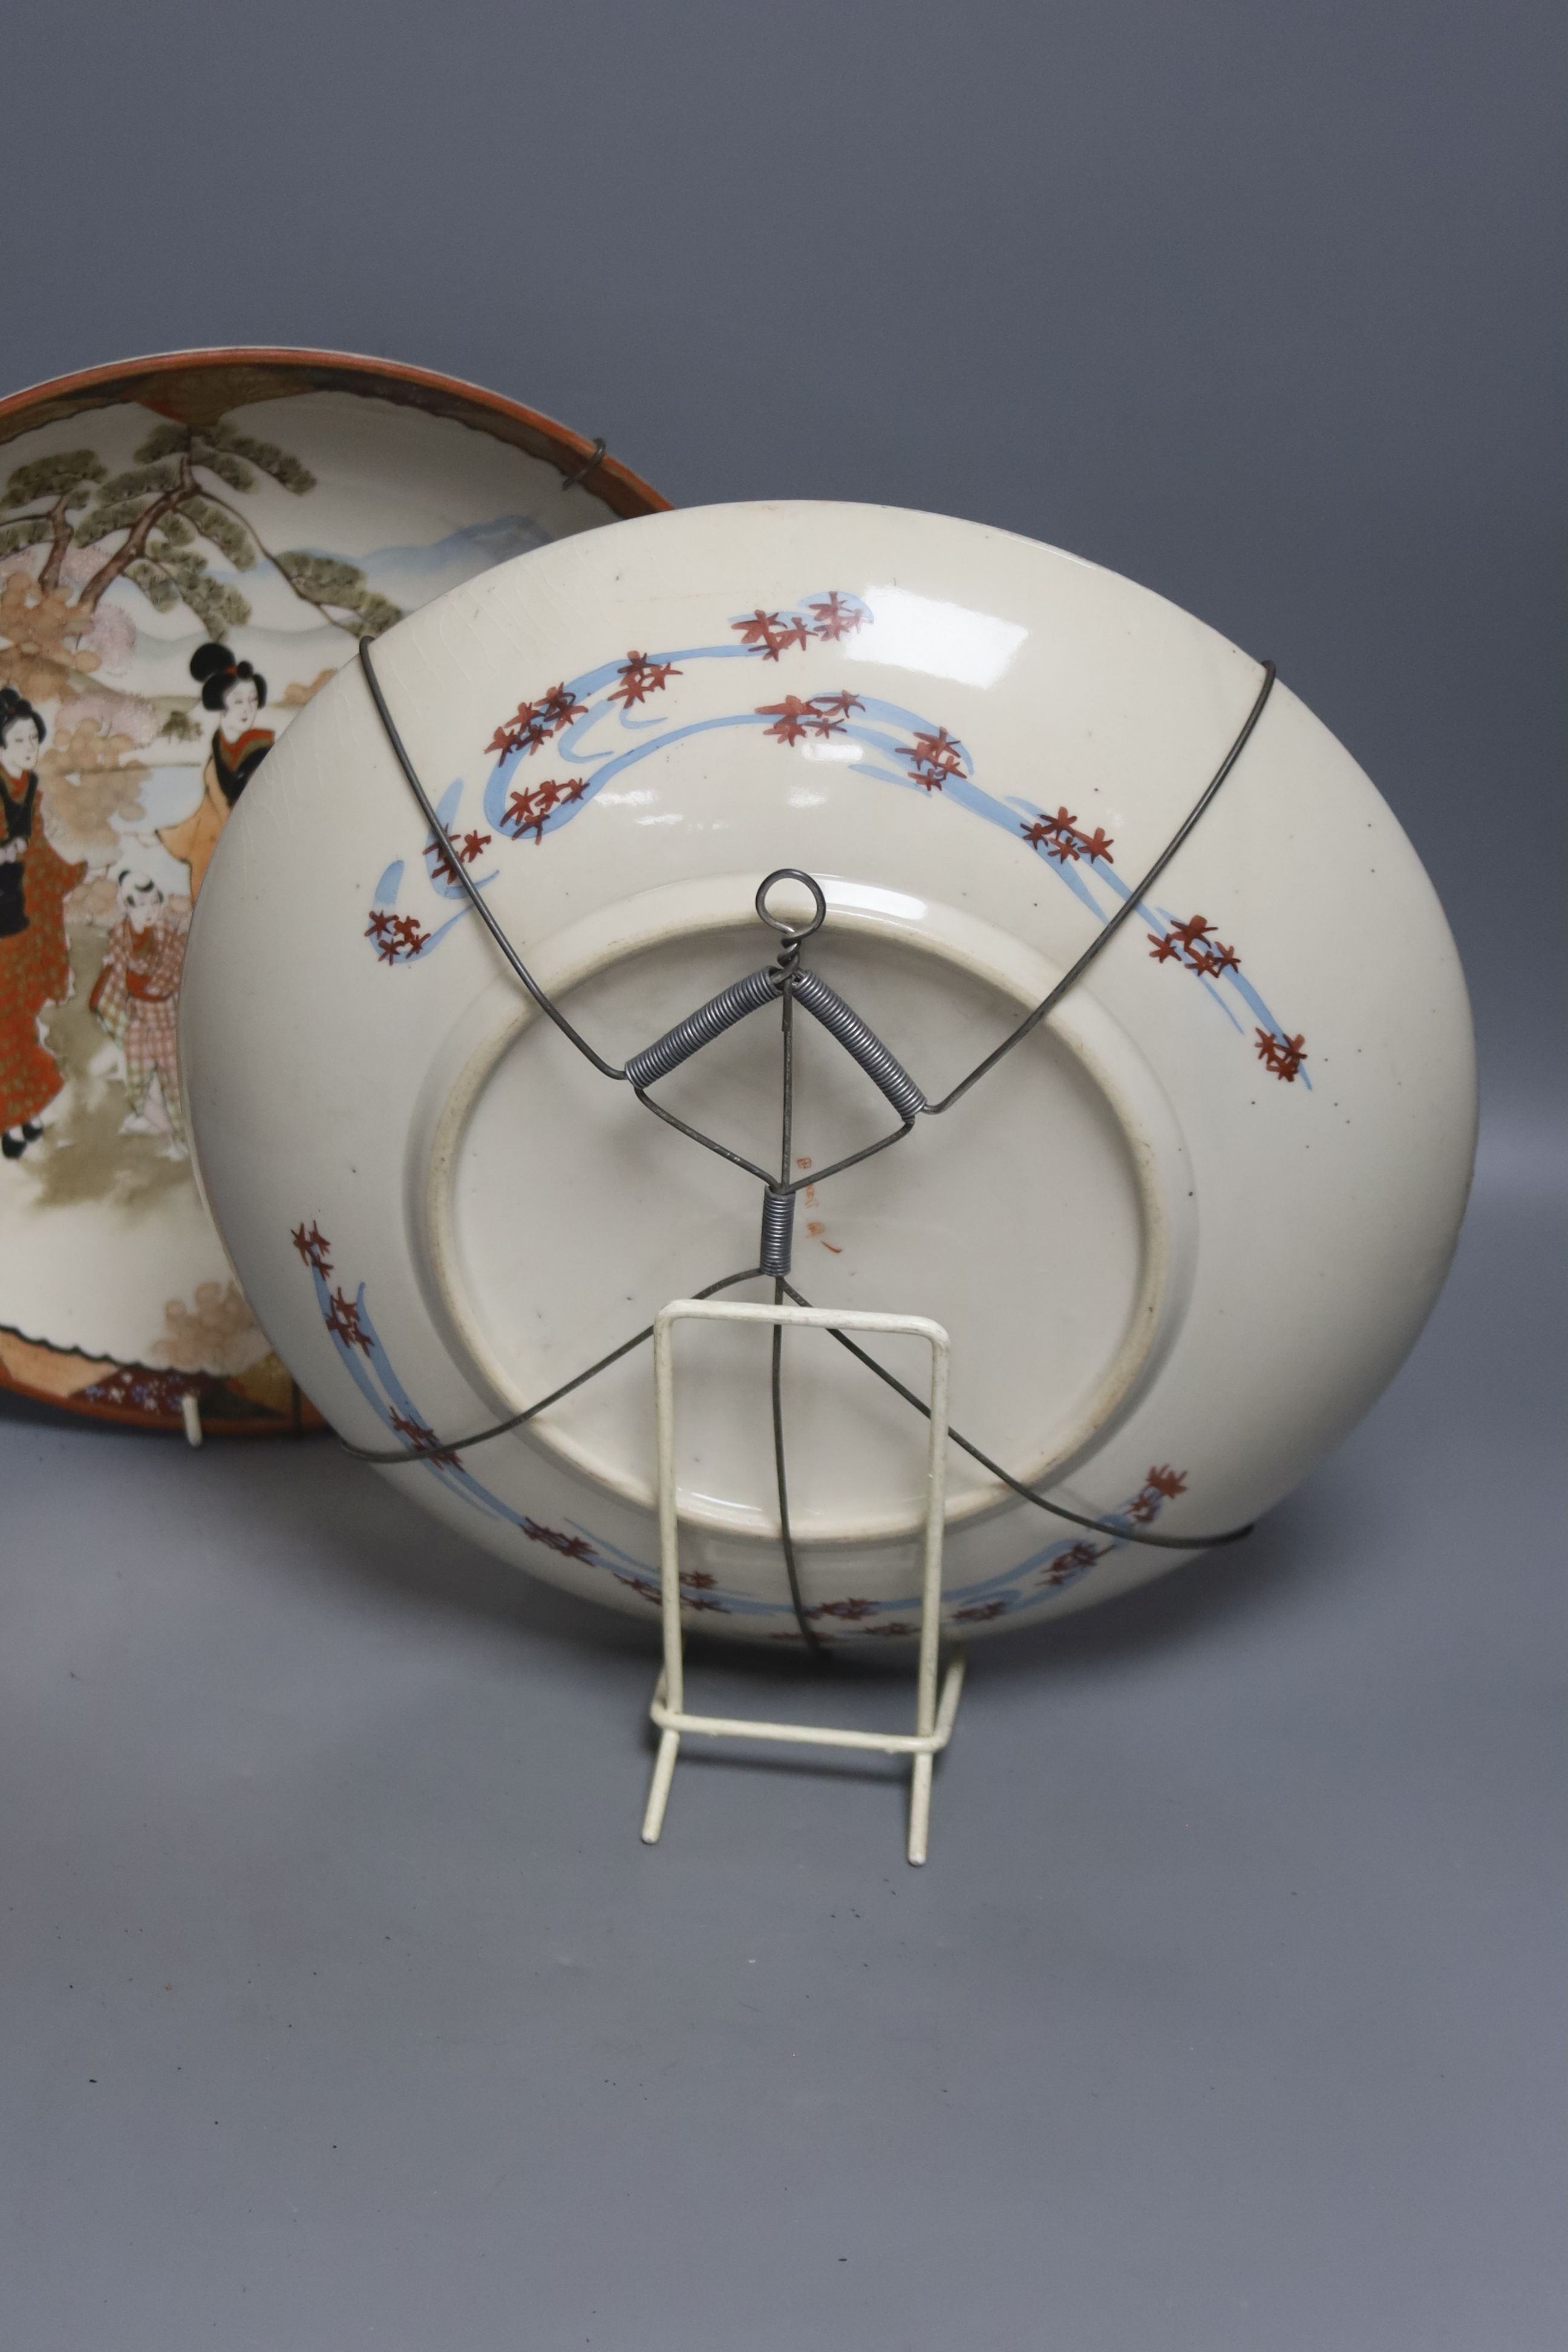 A late 19th century Japanese porcelain oval dish, 29cm, and a pair of Kutani style wall plates, 30cm